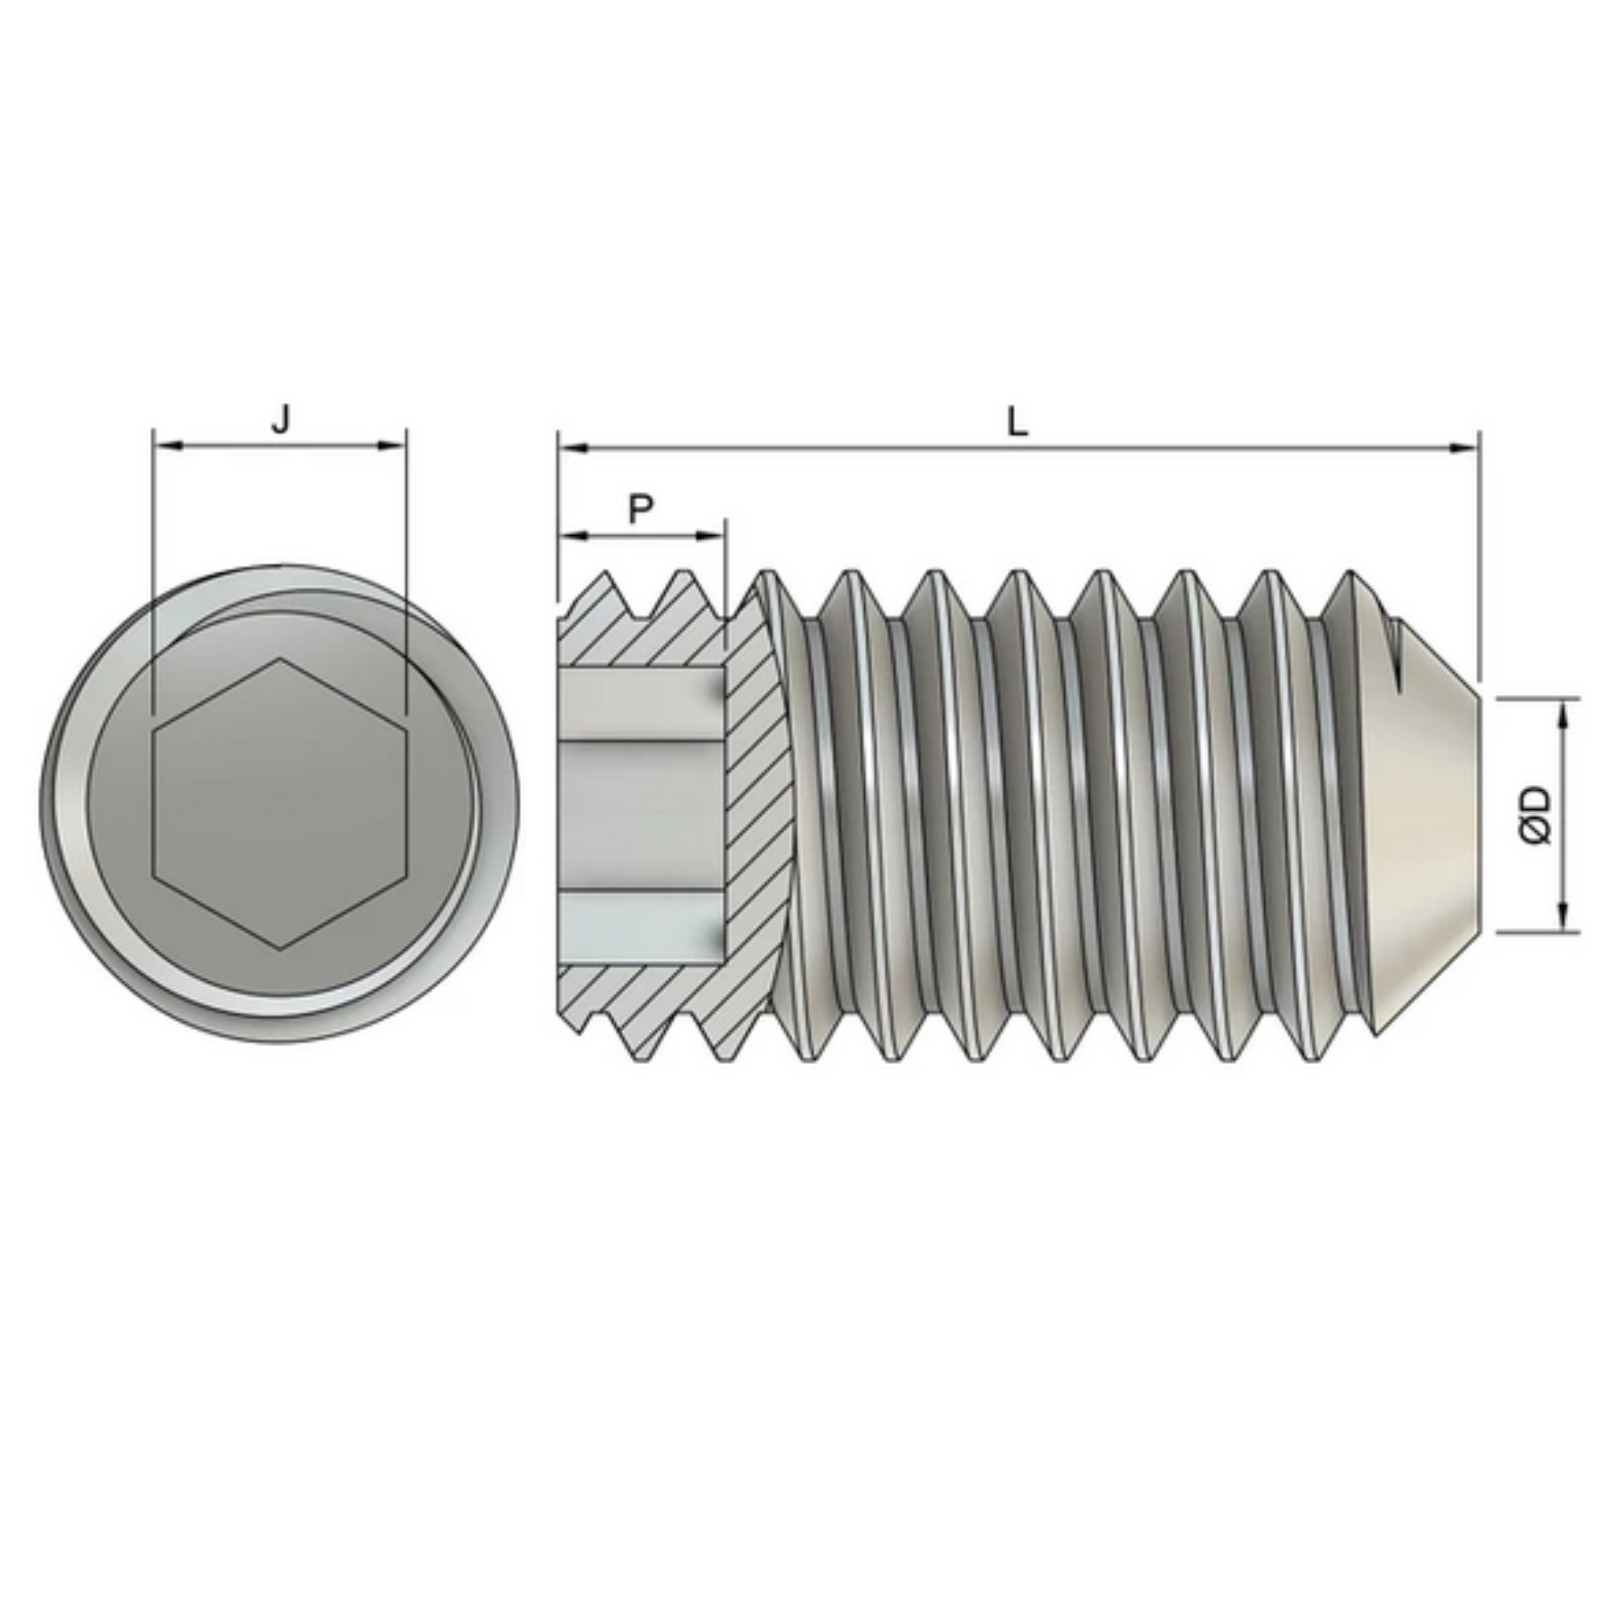 M3 Cup Point Set / Grub Screws (DIN 916) - Stainless Steel (A2)